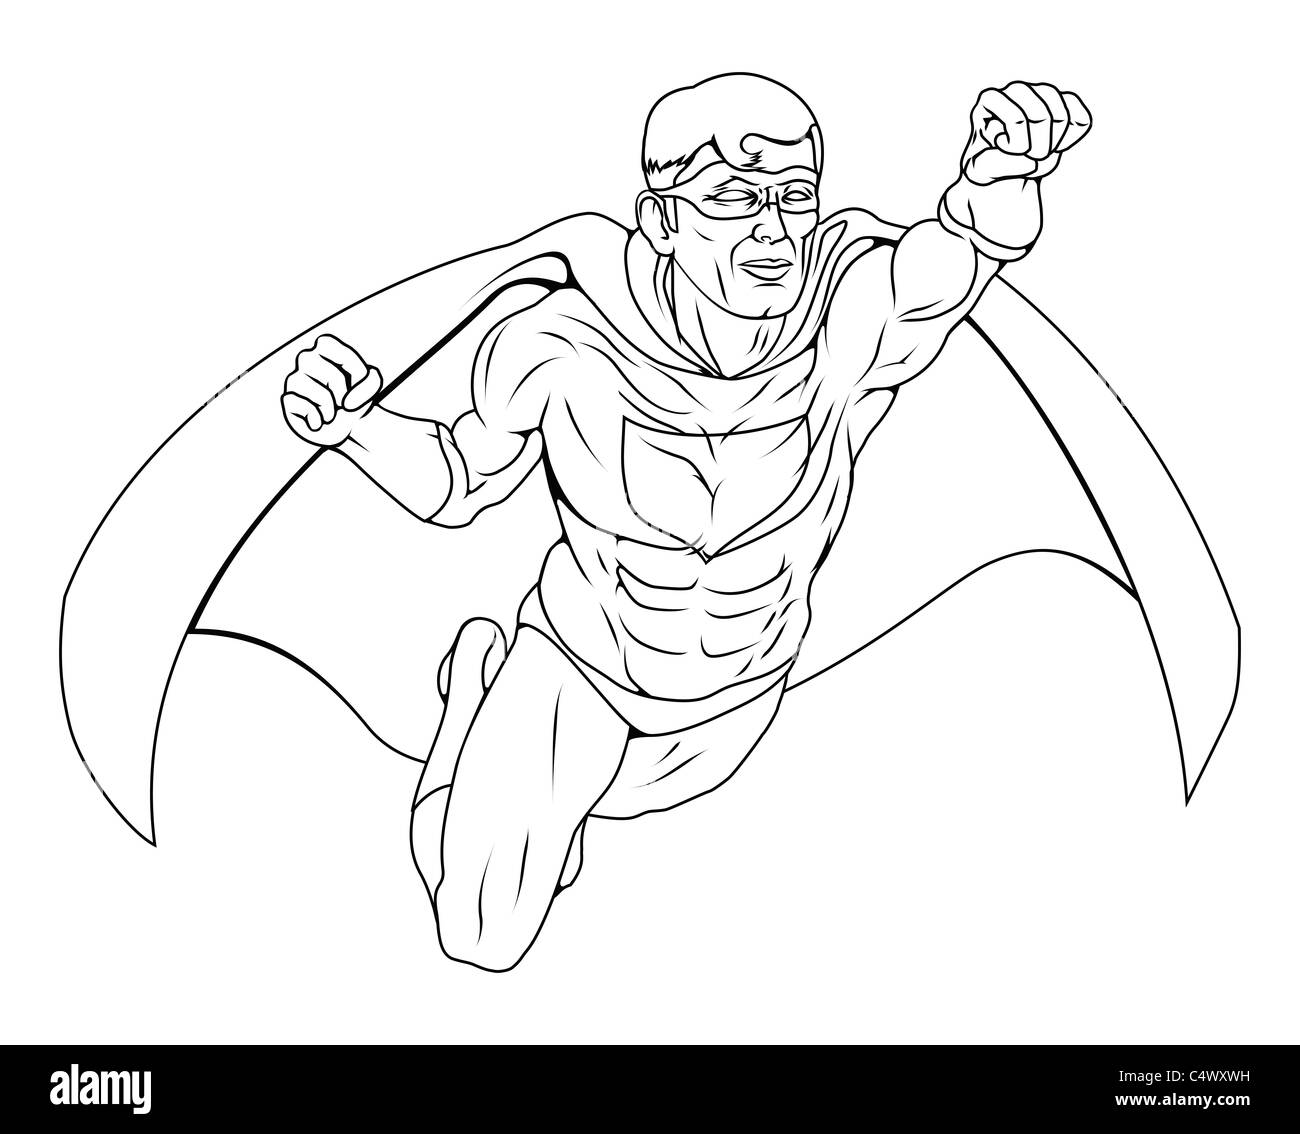 Monochrome illustration of a super hero man dressed costume with cape flying through the air Stock Photo